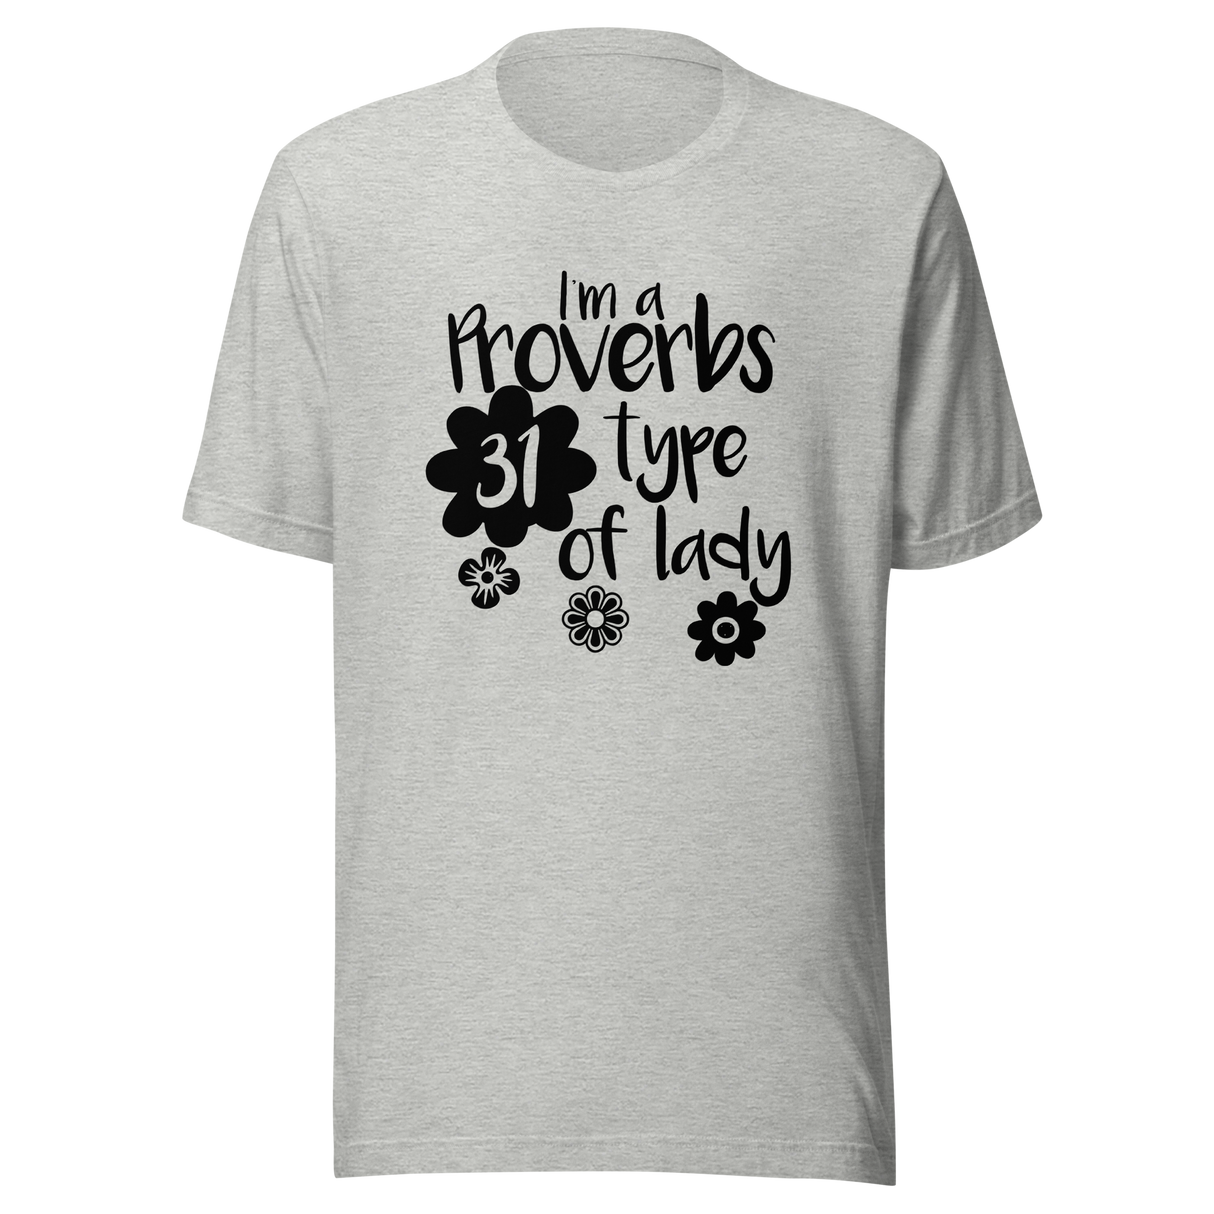 im-a-proverbs-31-type-of-lady-proverbs-tee-31-t-shirt-lady-tee-t-shirt-tee#color_athletic-heather